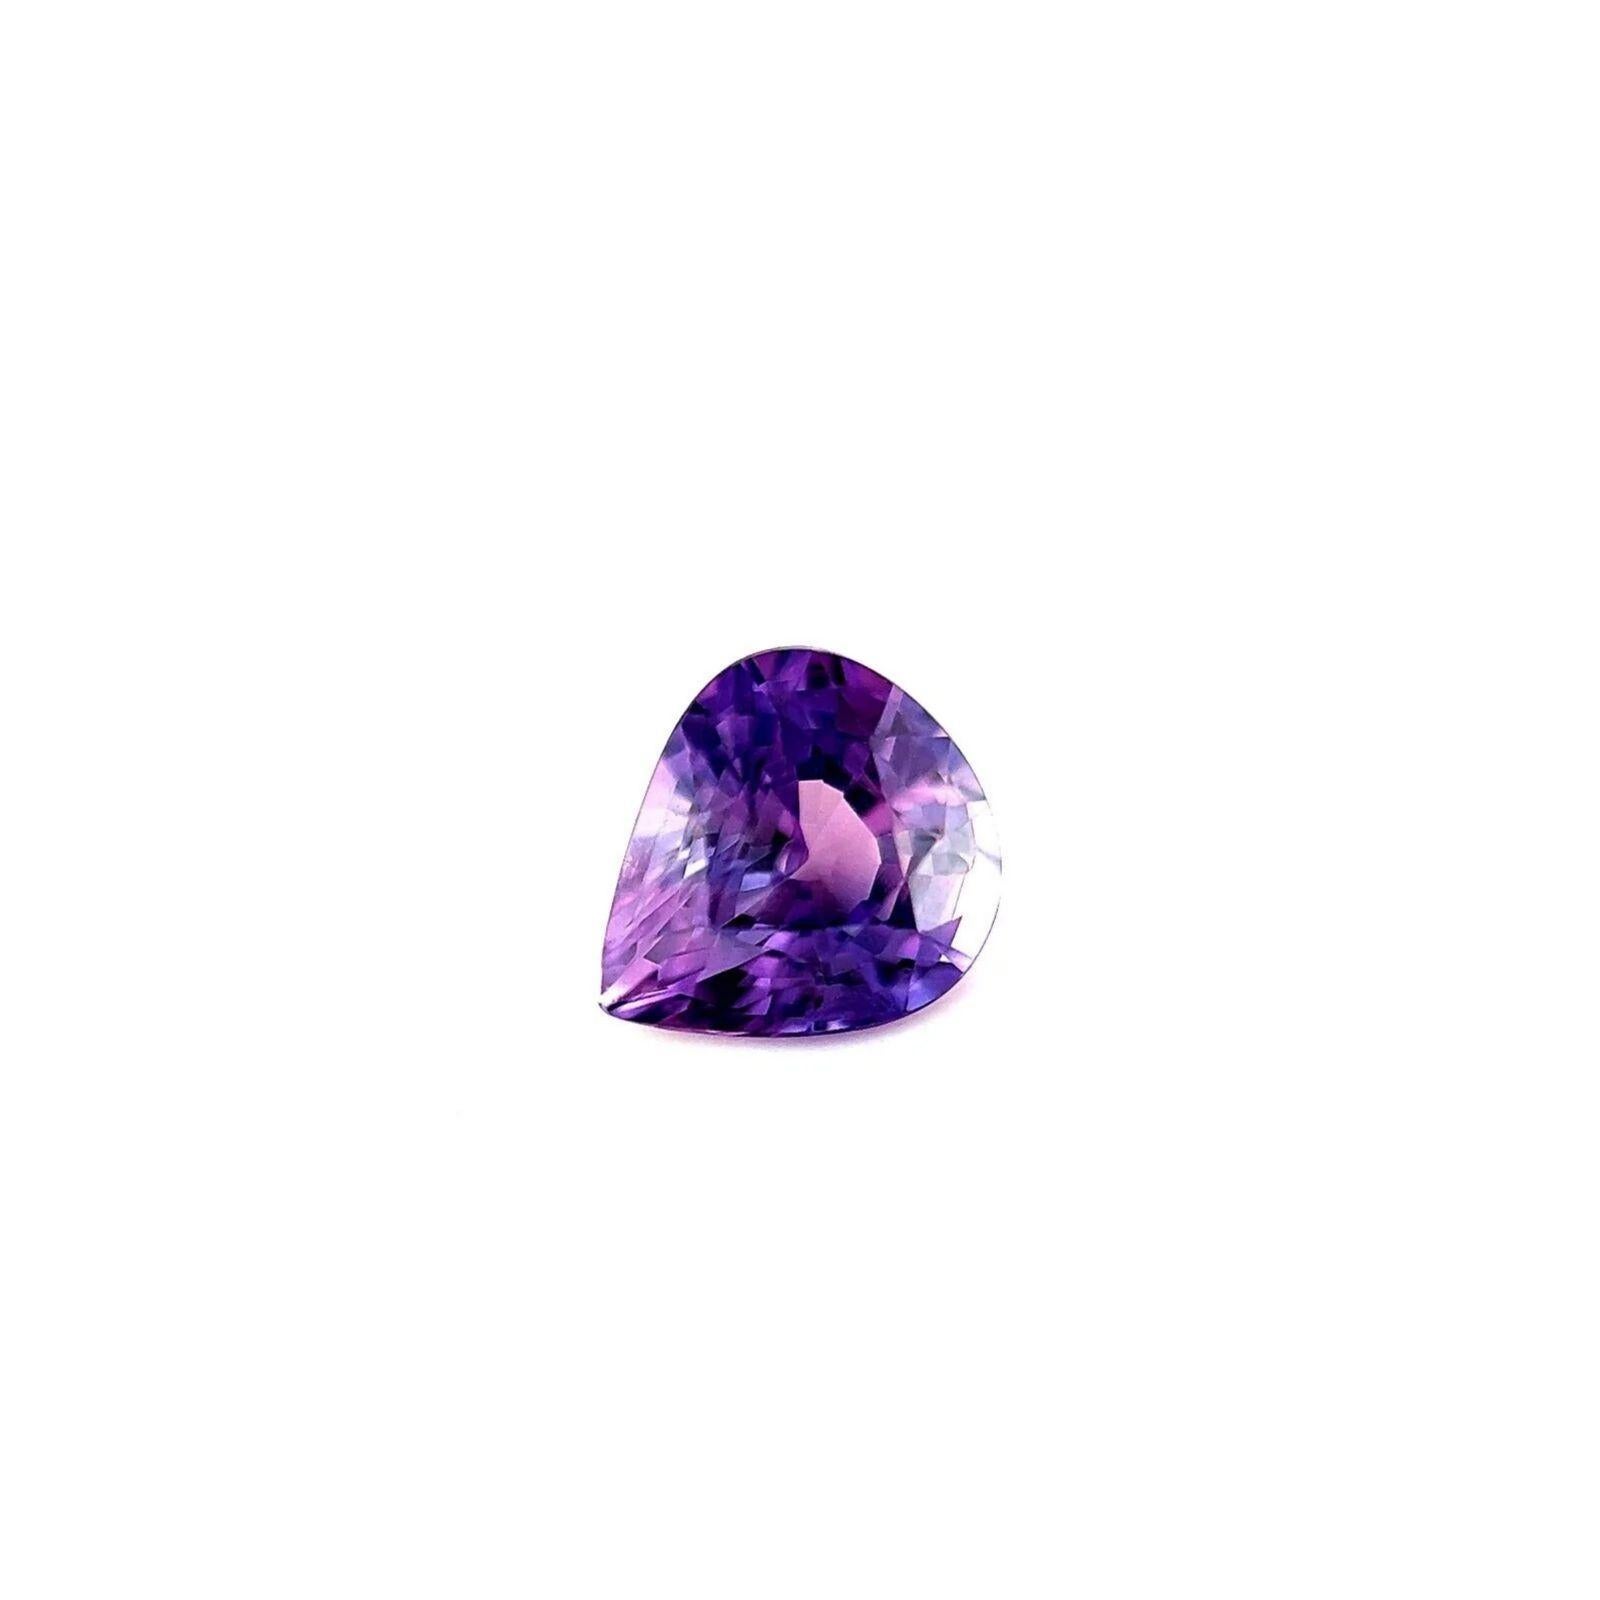 GIA Certified Fine Deep Pink Purple 1.30ct Sapphire Pear Cut Rare Gem 6.9x6.2mm

GIA Certified Fine Deep Pink Purple Sapphire Gemstone.
1.30 Carat with very good clarity and a stunning deep pink purple colour. Vibrant and rich colour stone with an